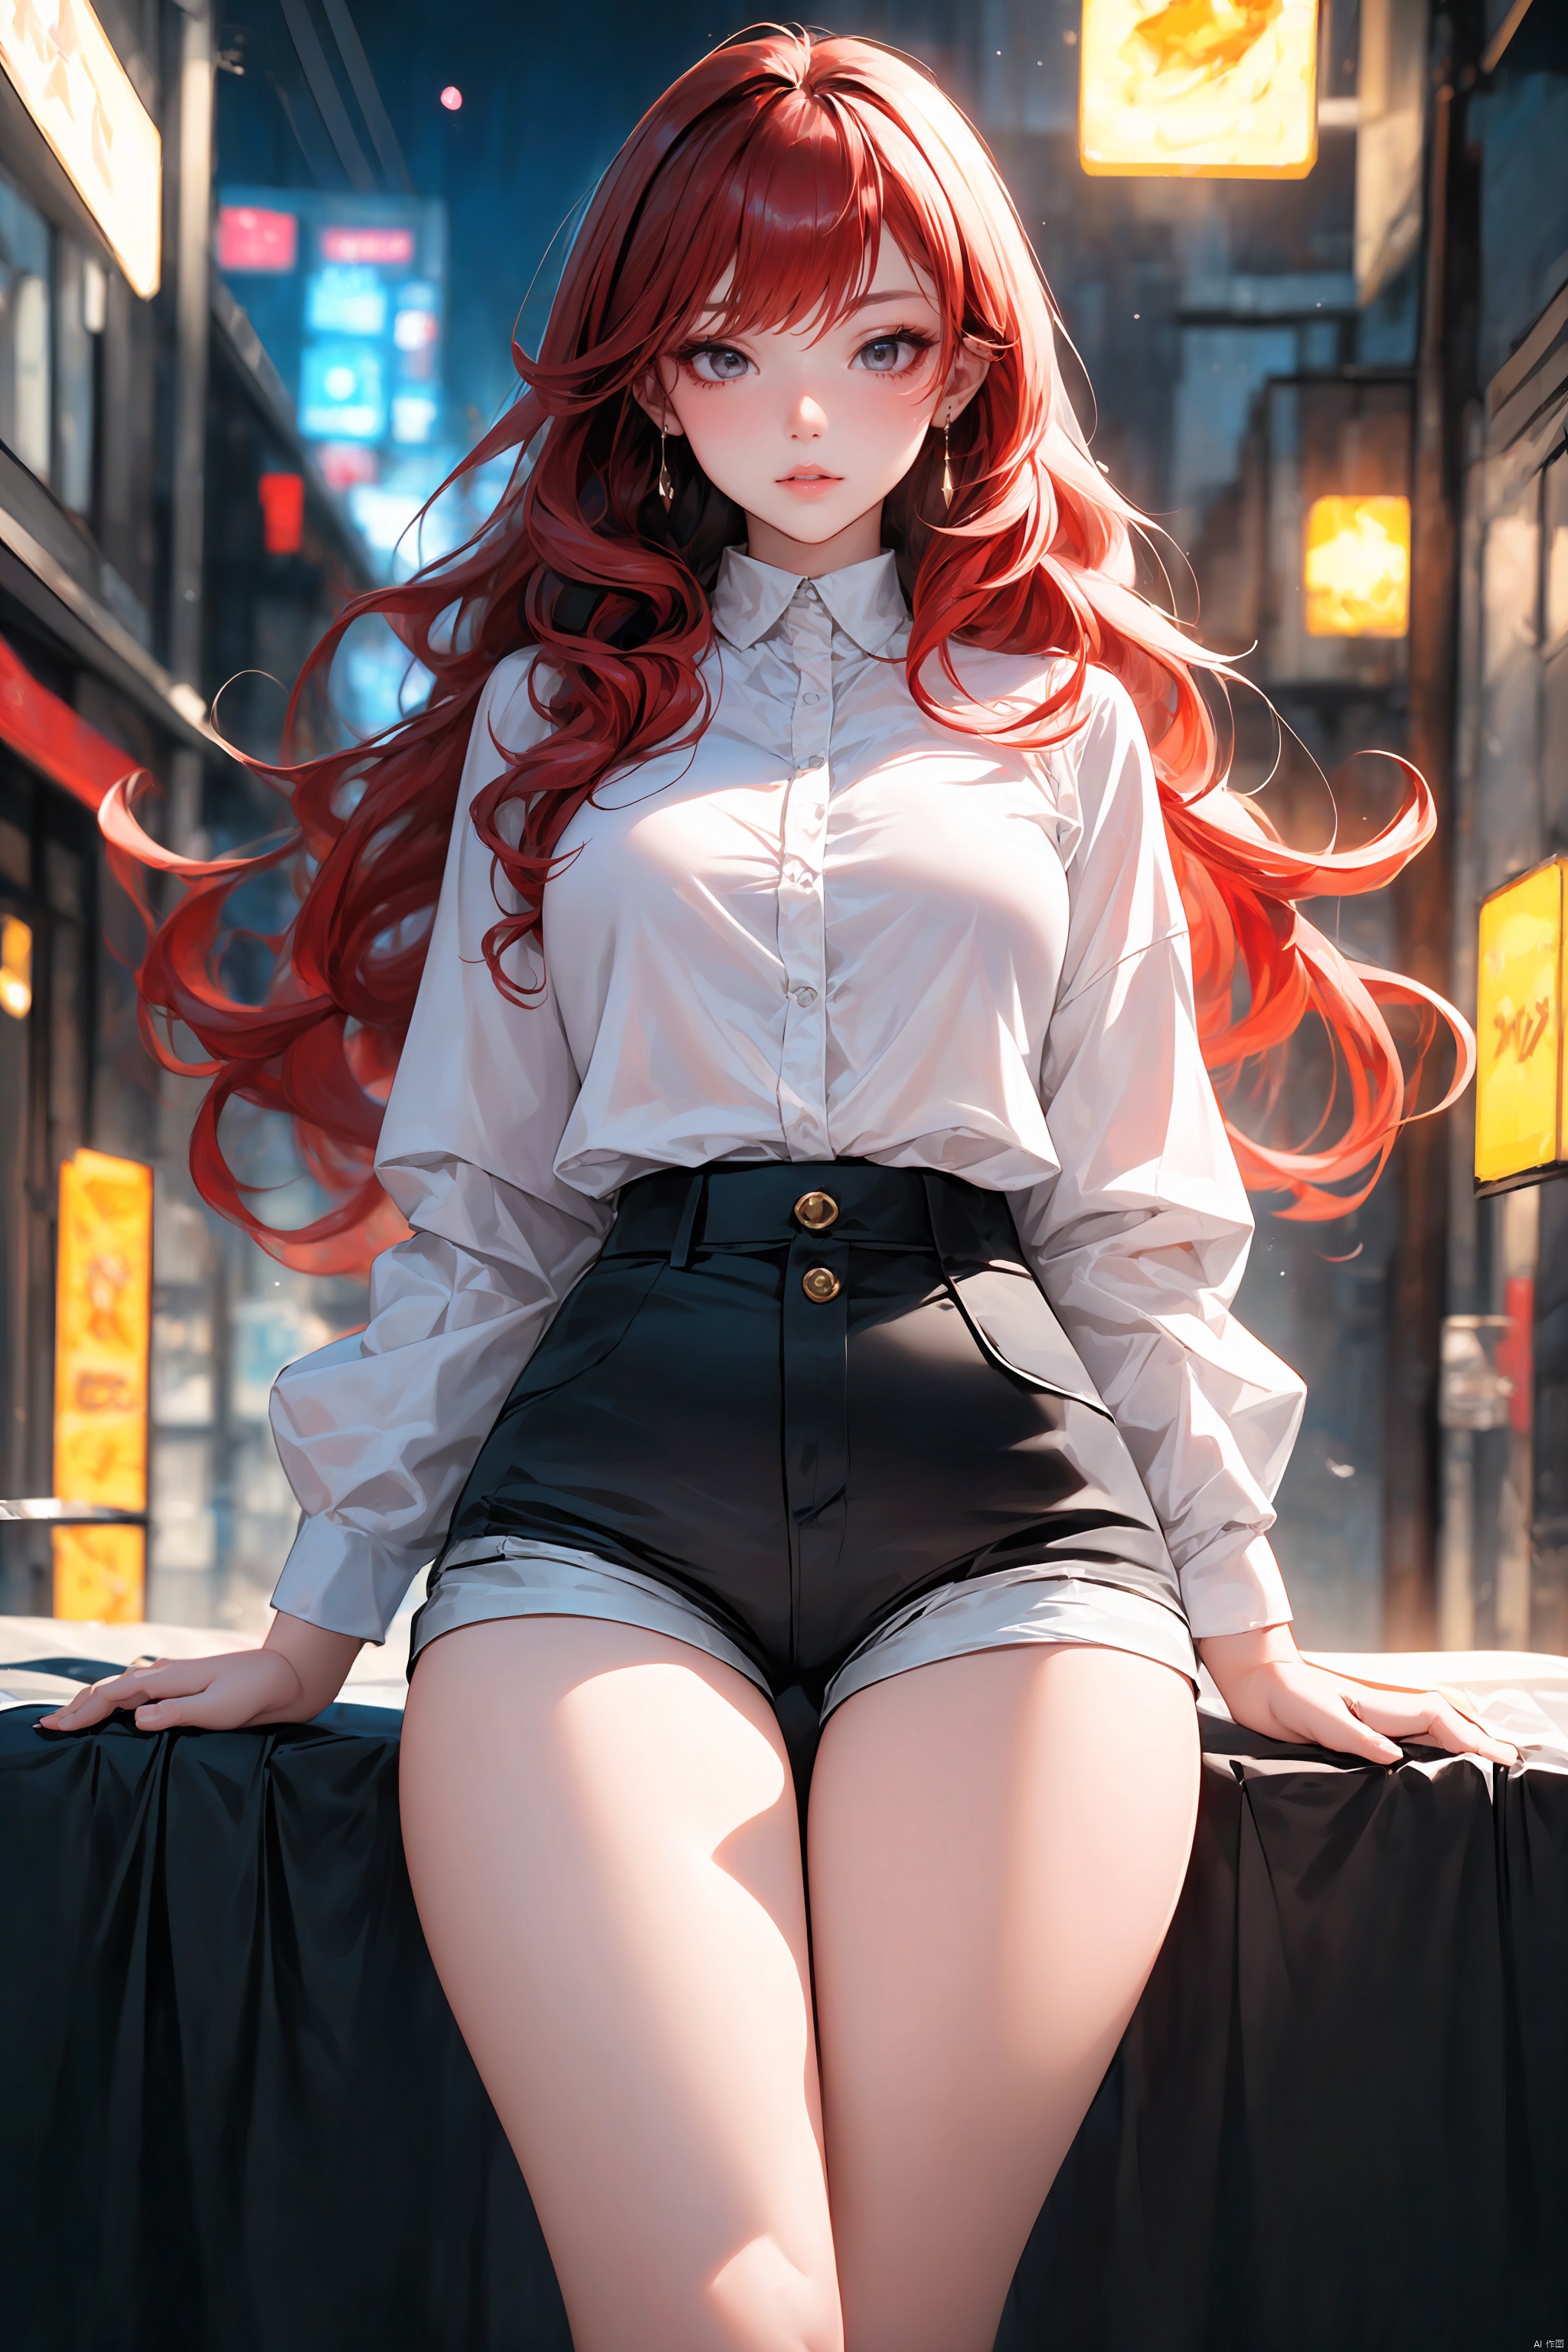  KK-Comic Style, looking at viewer,
bangs,lips, makeup, on bed,
(pure red hair:1.4), (black eyes:1.3)
crop_top, 
skirt, night_sky, rooftop, city, 
neon lights, highly detailed, 
ultra-high resolutions, 32K UHD,
best quality, masterpiece,
partiallysubmerged, flower, airbubble, ((poakl))

1girl\((bishoujo), (lovely face:1.4), (pure red hair:1.4), (black eyes:1.3), (papaya-shaped breasts:1.1), curly_hair, long_hair, (hair_past_waist:1.4), plump_*****, long_legs, sharp_eyelid, black eyeliner, black eyelashes, red eyeshadow, 
(perfect detailed face), (pink lipgloss:1.3), (perfect hands)\),
golden Ultra-thin transparent, (silver Ultra-thin transparent mech:1.3), (all golden color scheme:1.4), 

(short shorts:1.4),